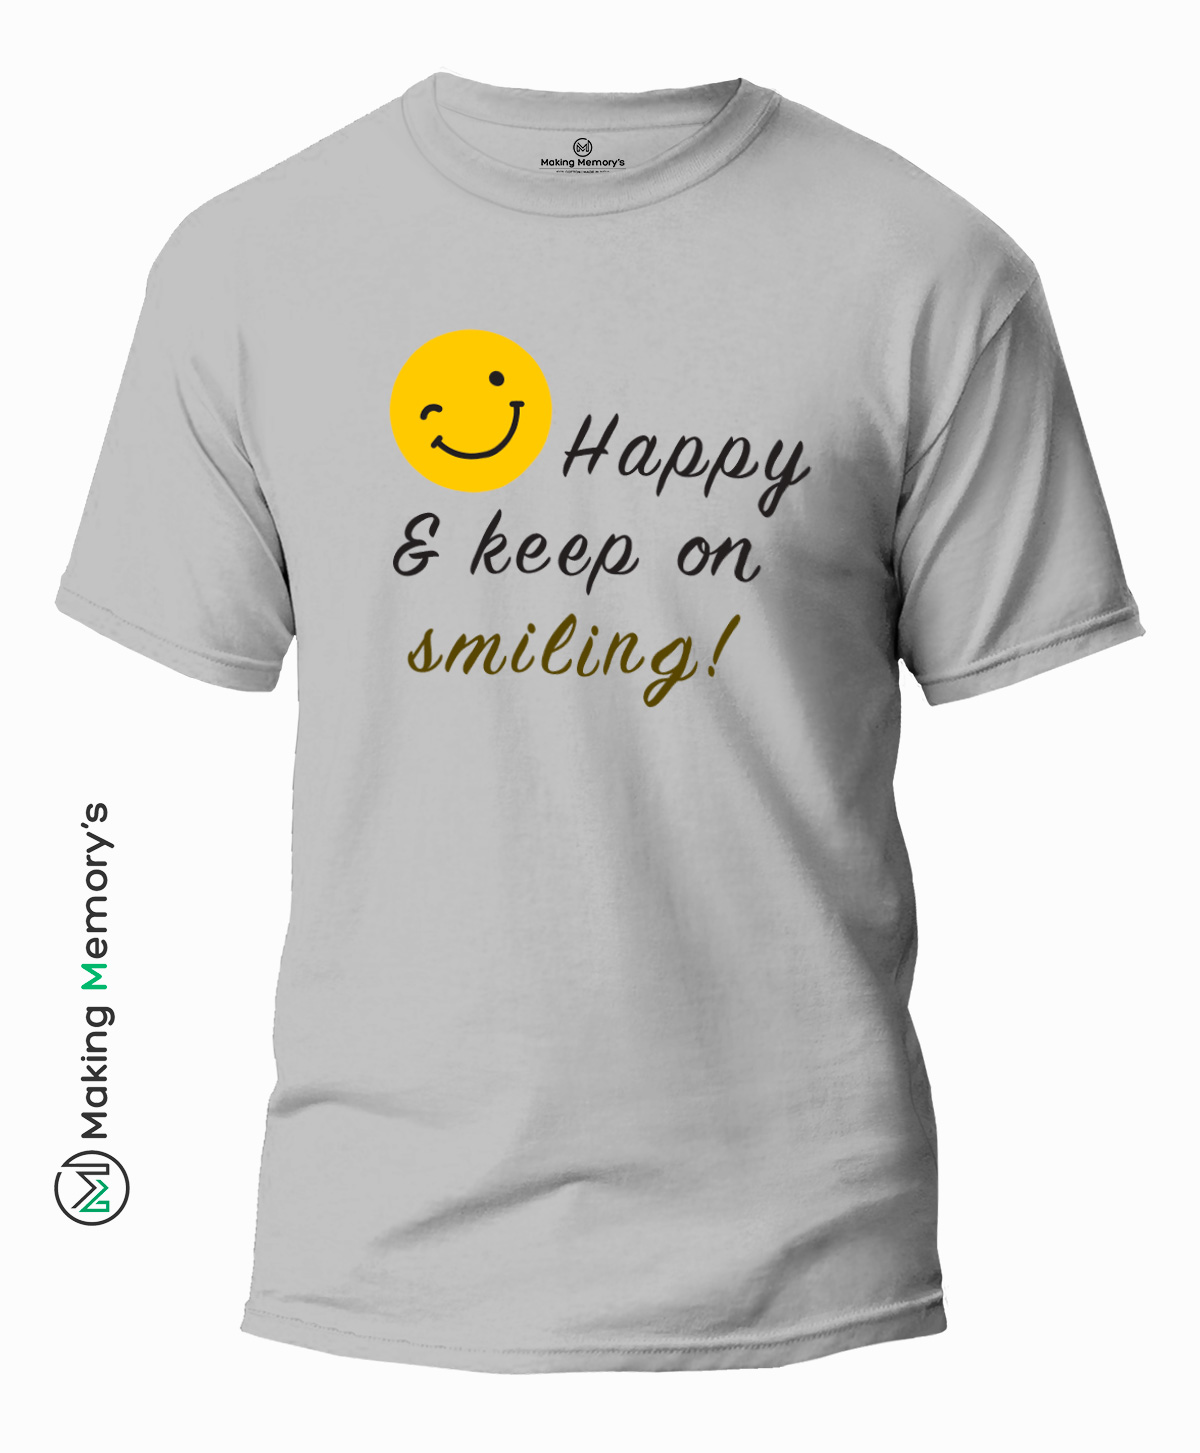 Happy-And-Keep-On-Smiling-Gray-T-Shirt